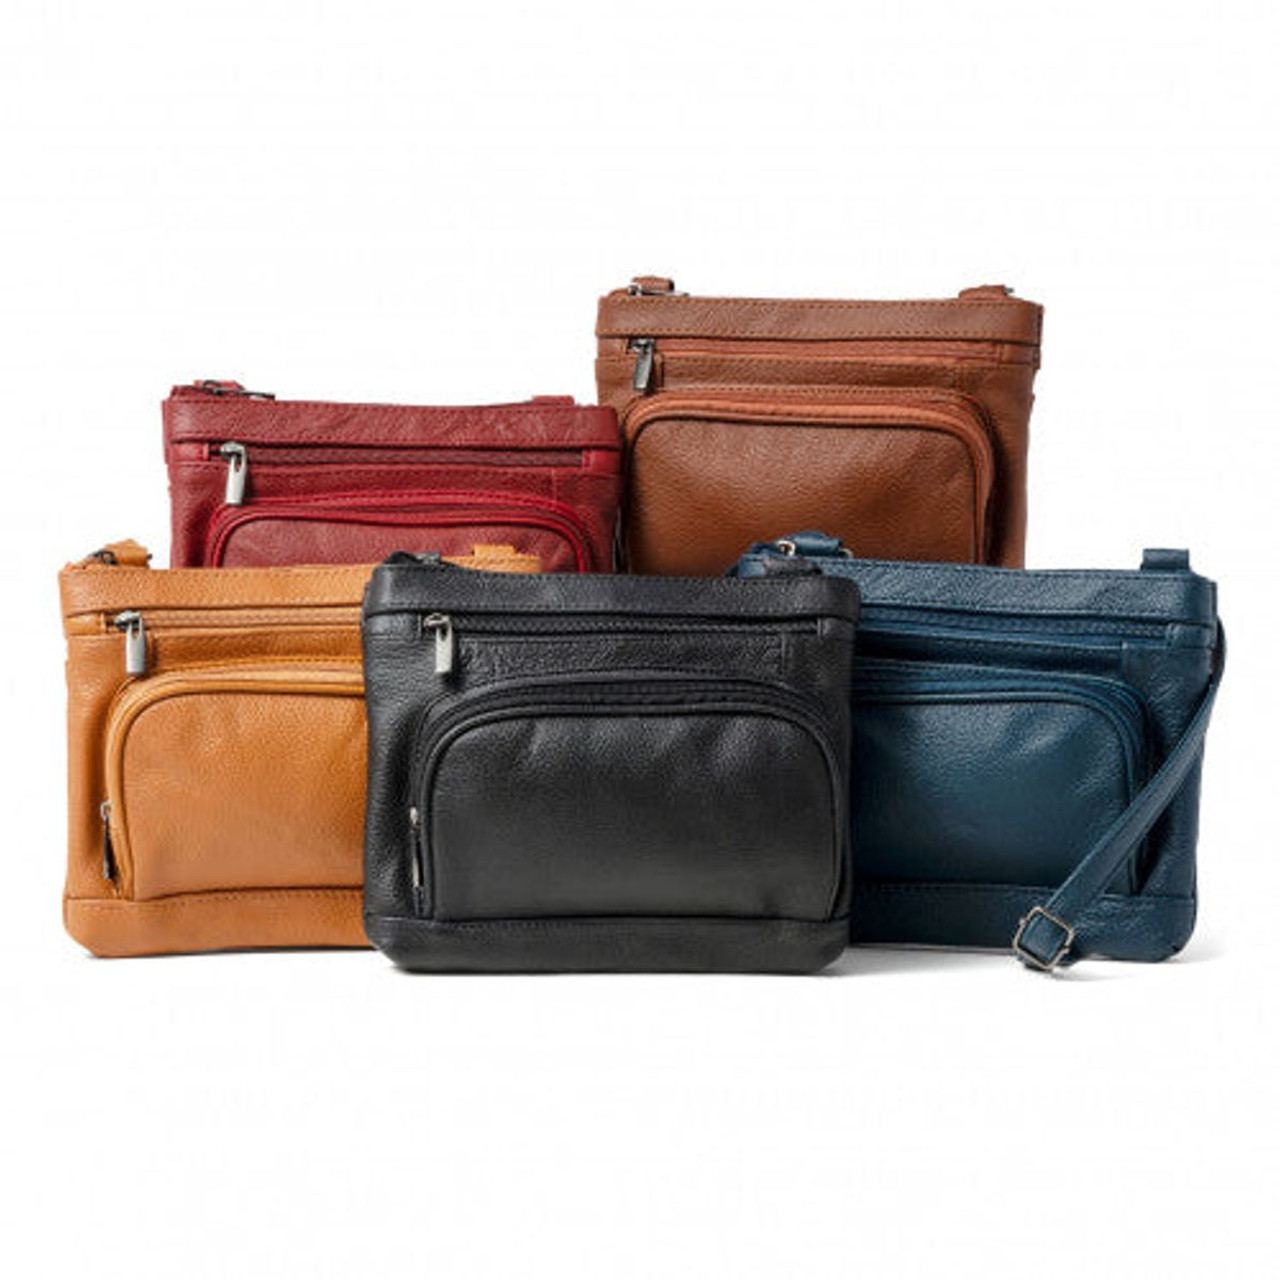 Super Soft Leather Wide Crossbody Bag product image